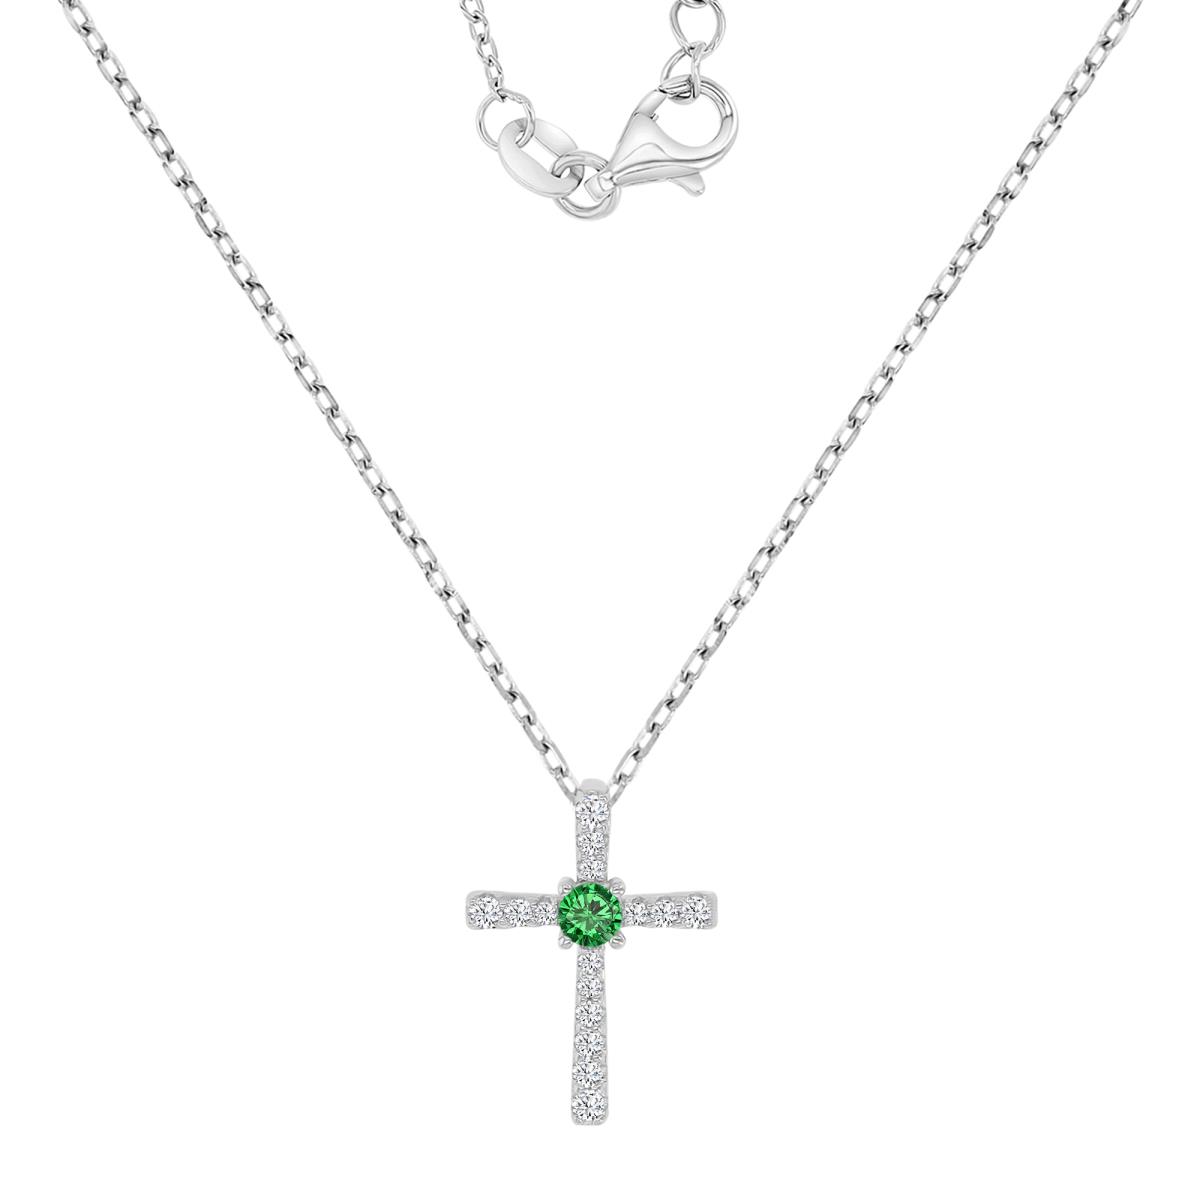 Sterling Silver Rhodium 16.8X12MM Polished Green Nano & White CZ Cross 13+2" Necklace